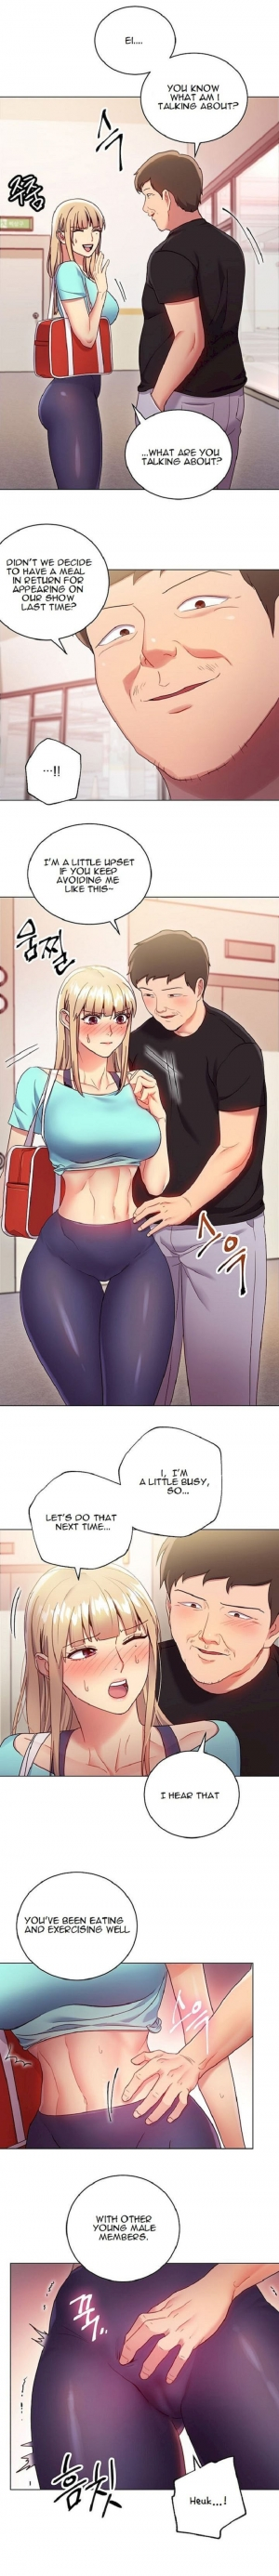 [Neck Pilllow] Stepmother Friends Ch.14/? [English] [Hentai Universe] - Page 151